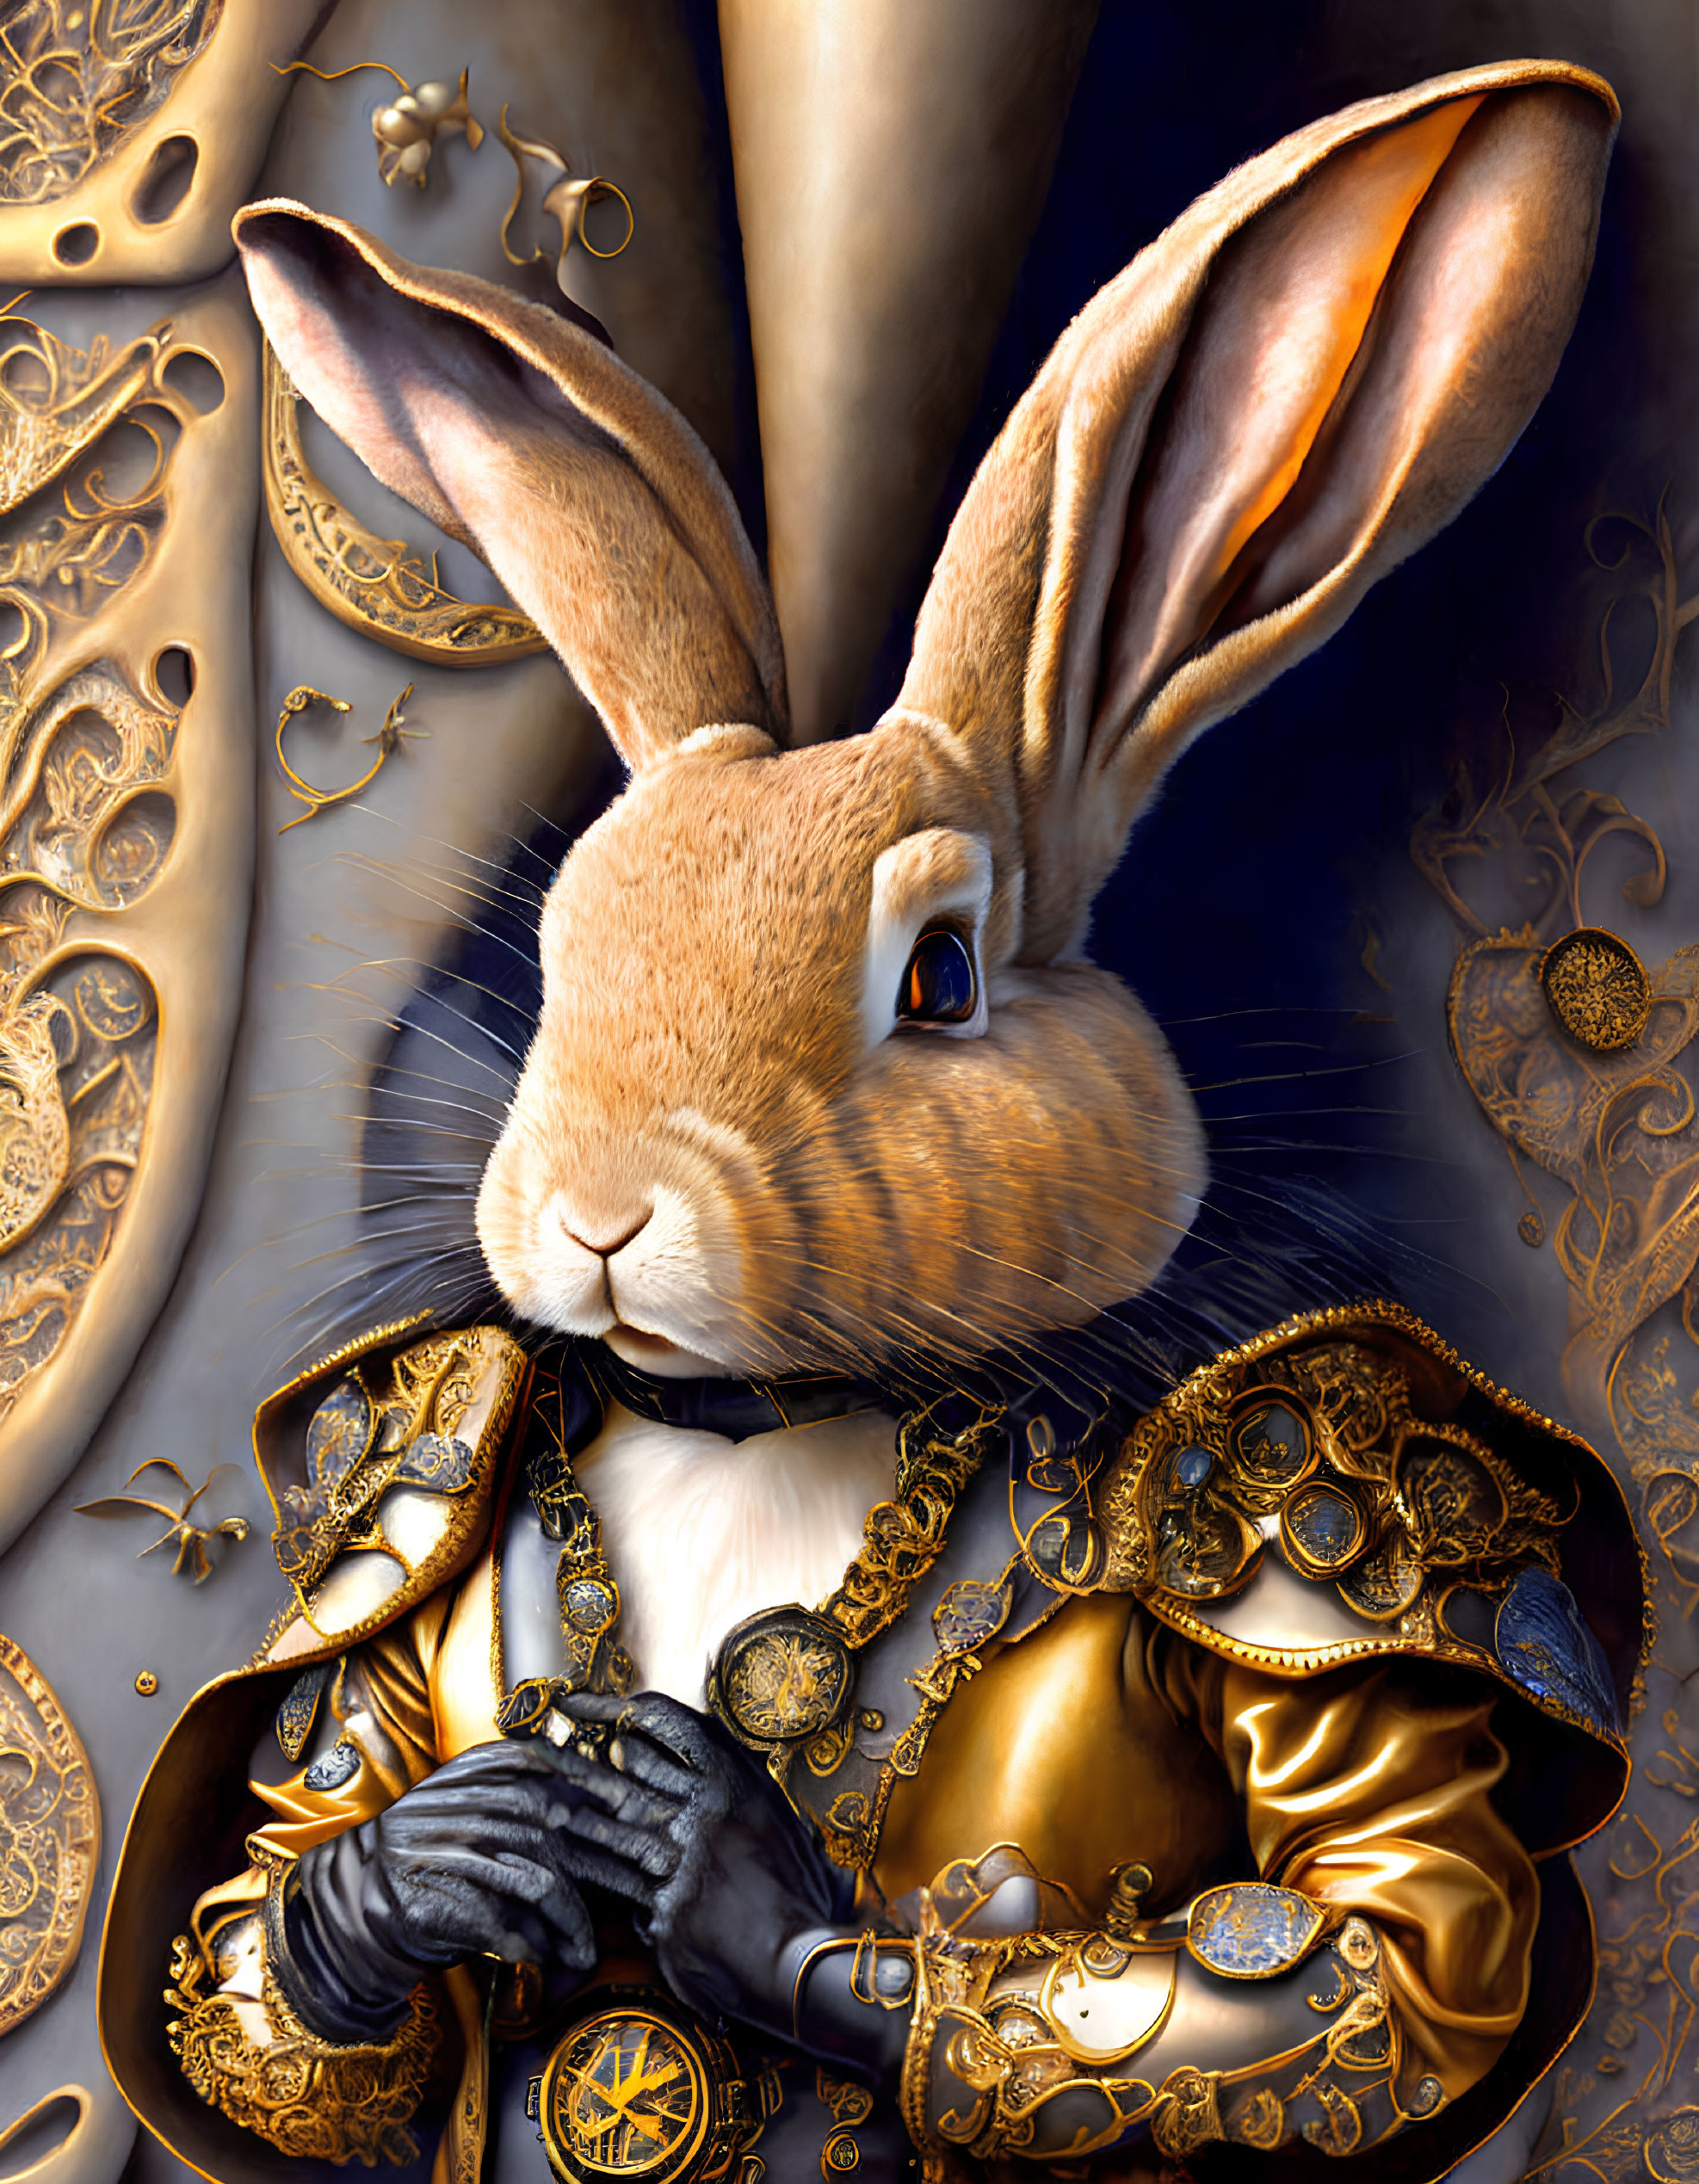 Anthropomorphic rabbit in gold-trimmed coat with pocket watch